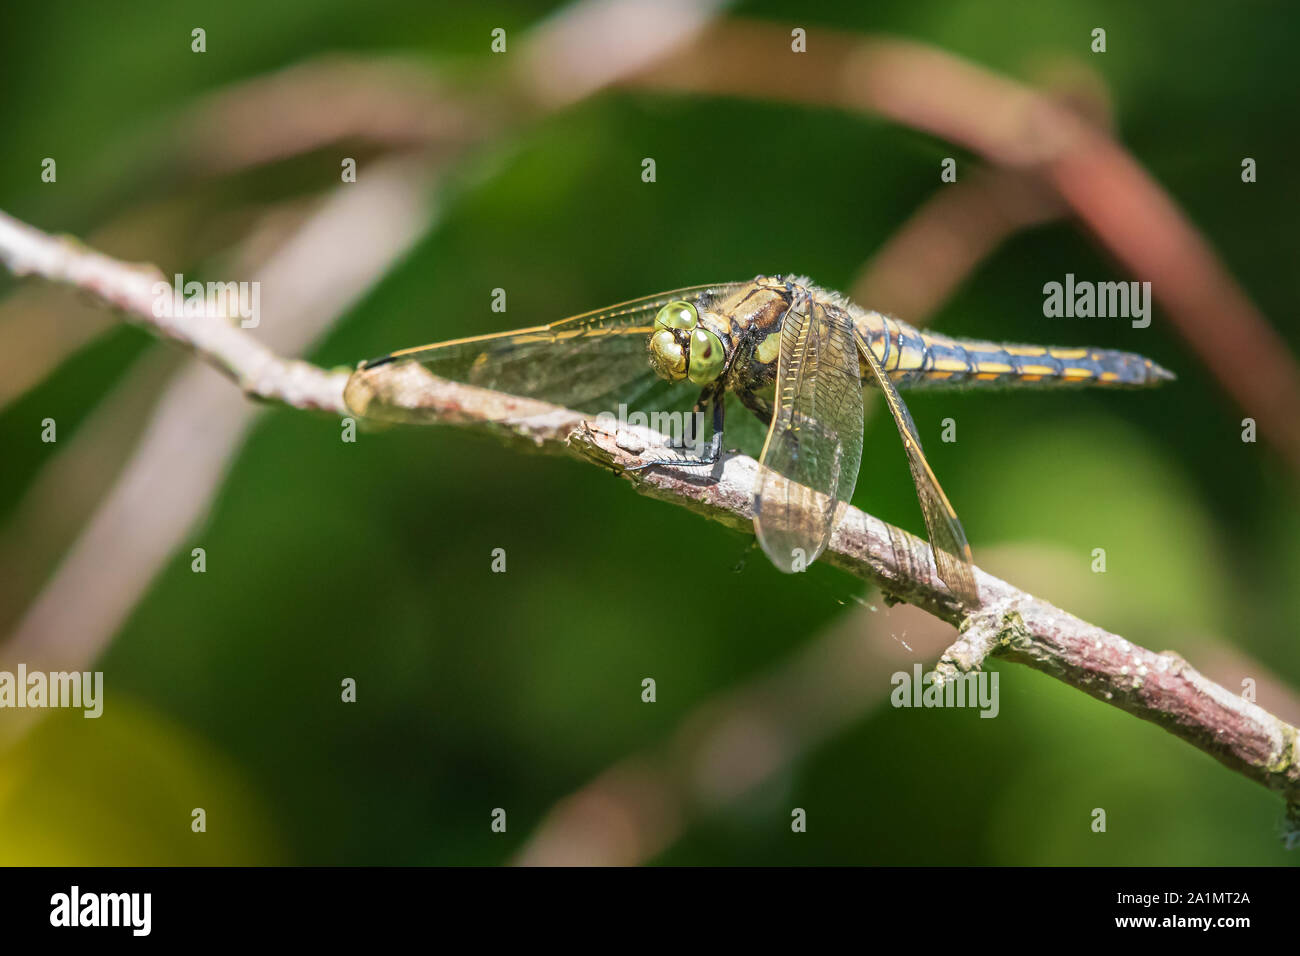 Black-tailed skimmer, Orthetrum cancellatum, is a dragonfly of Europe and Asia. Female specie is resting, warming up in the warm summer sunlight. Stock Photo